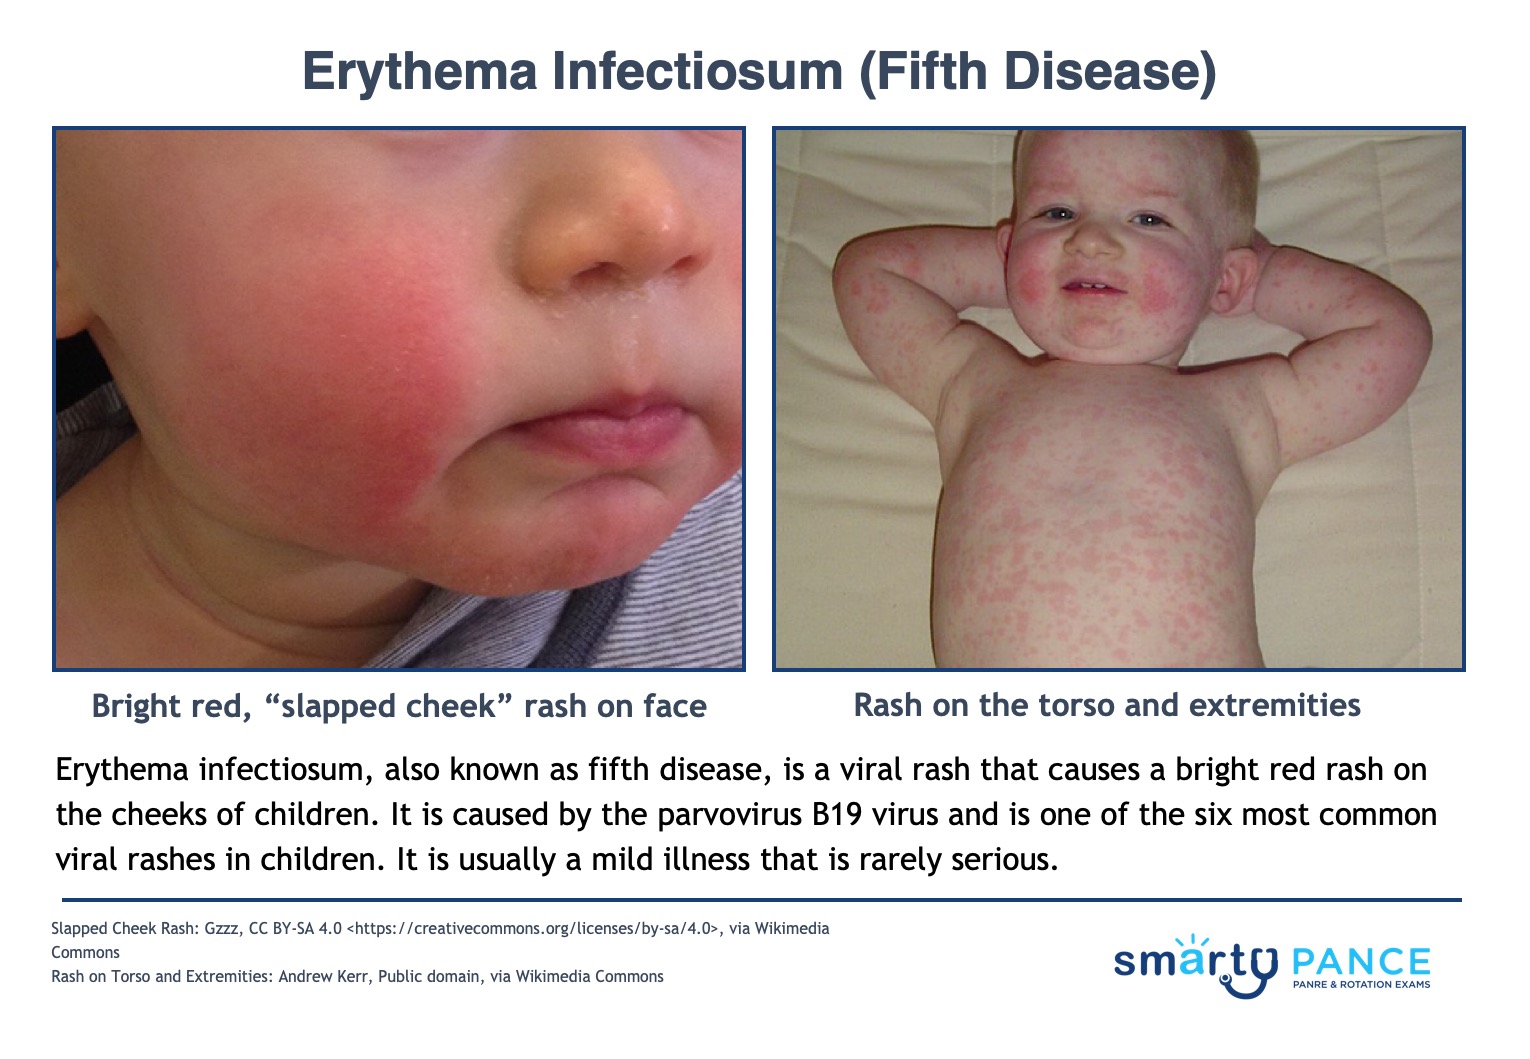 Erythema infectiosum (Lecture + ReelDx) - Smarty PANCE